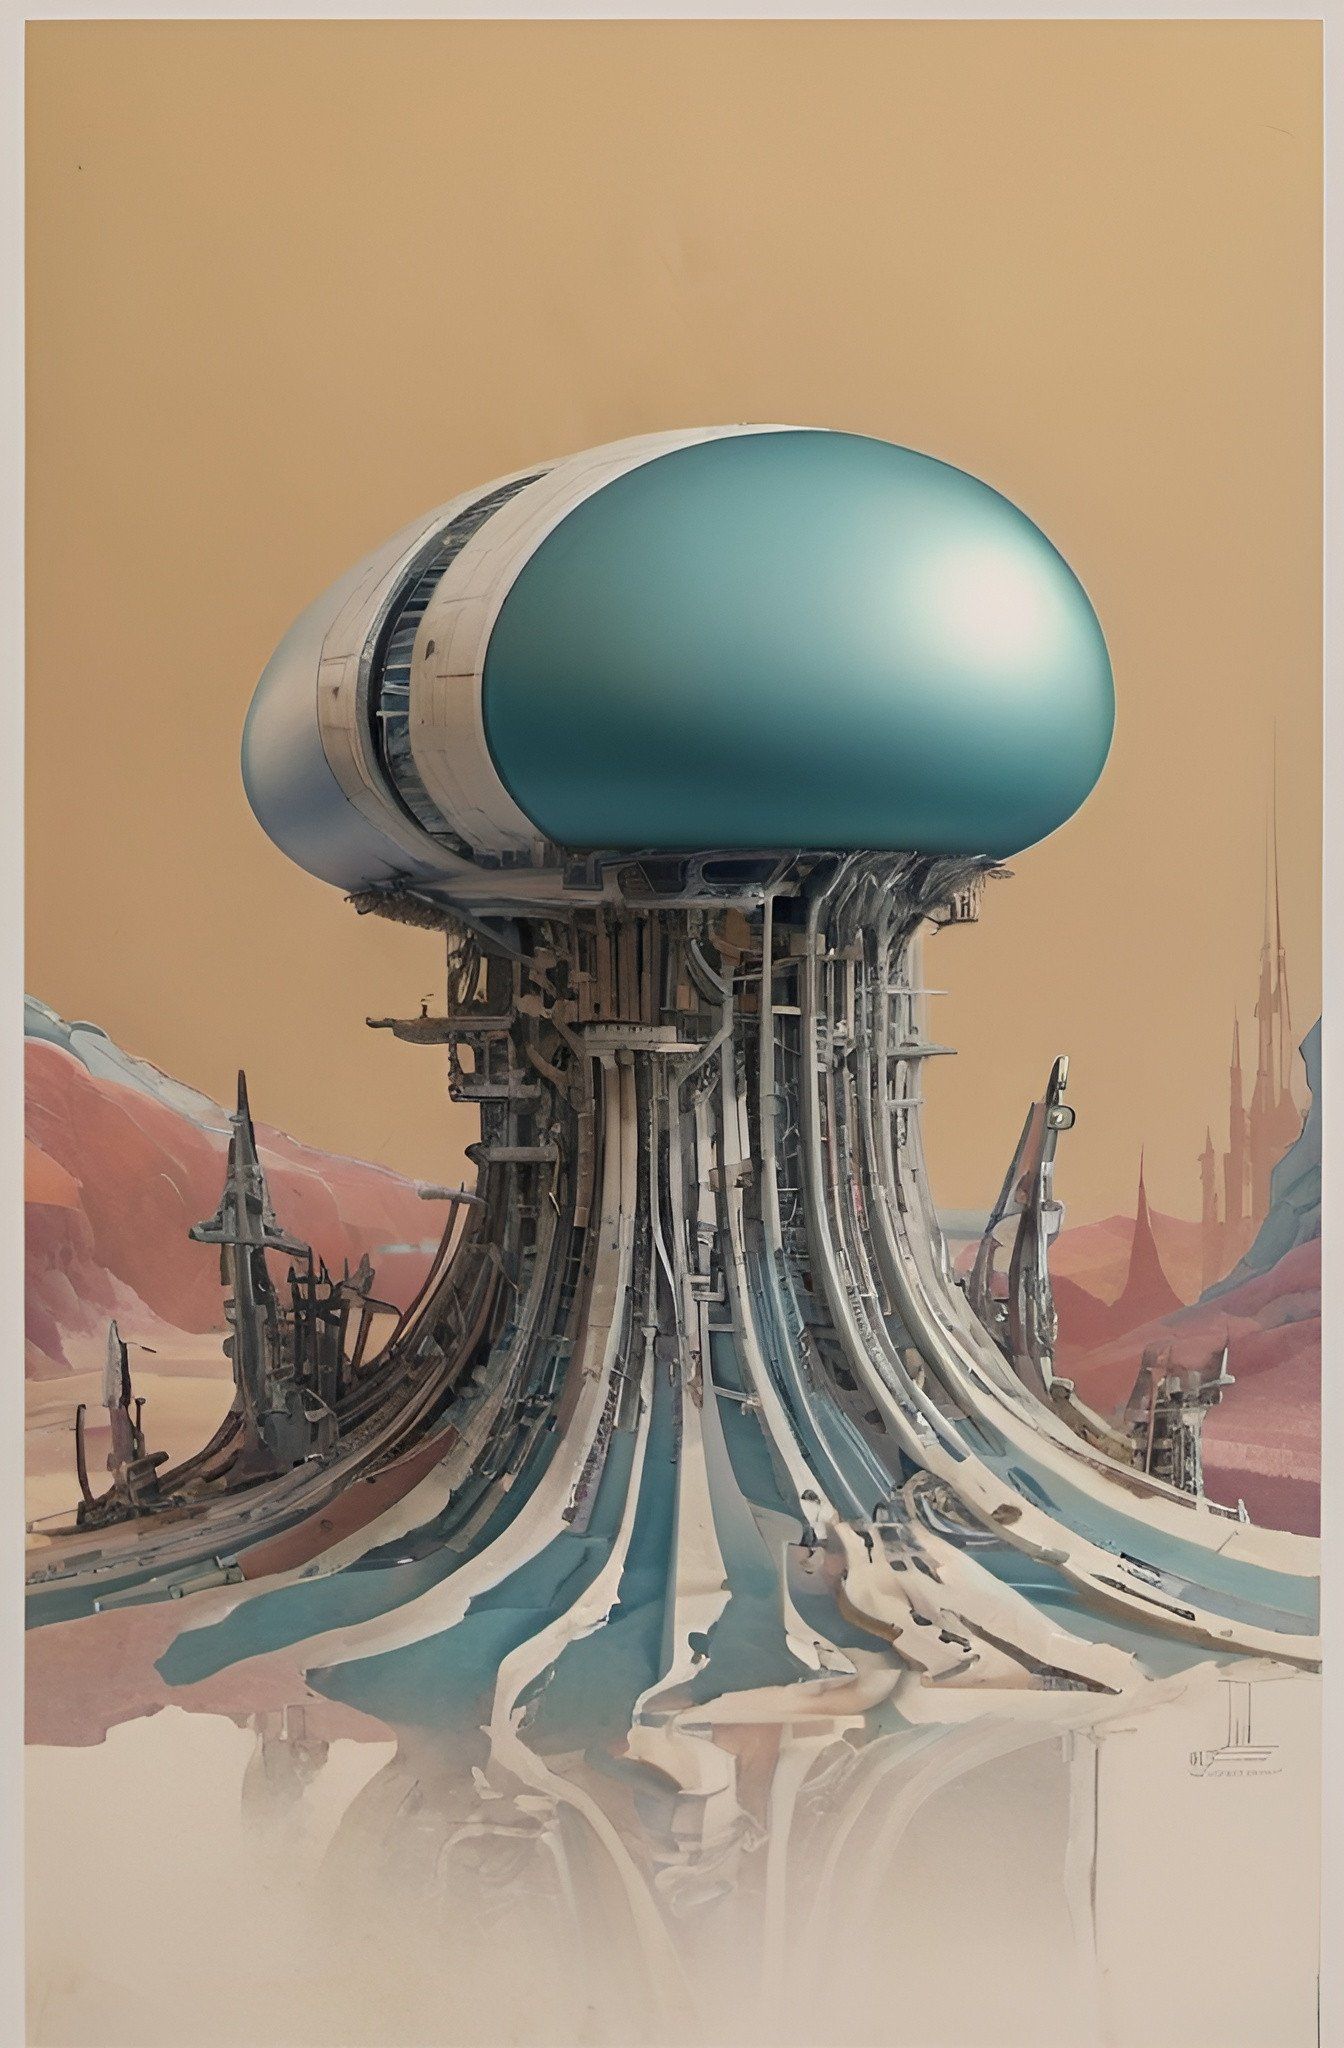 Prompt: a futuristic city with a giant blue object in the middle of it's landscape, with a sky background